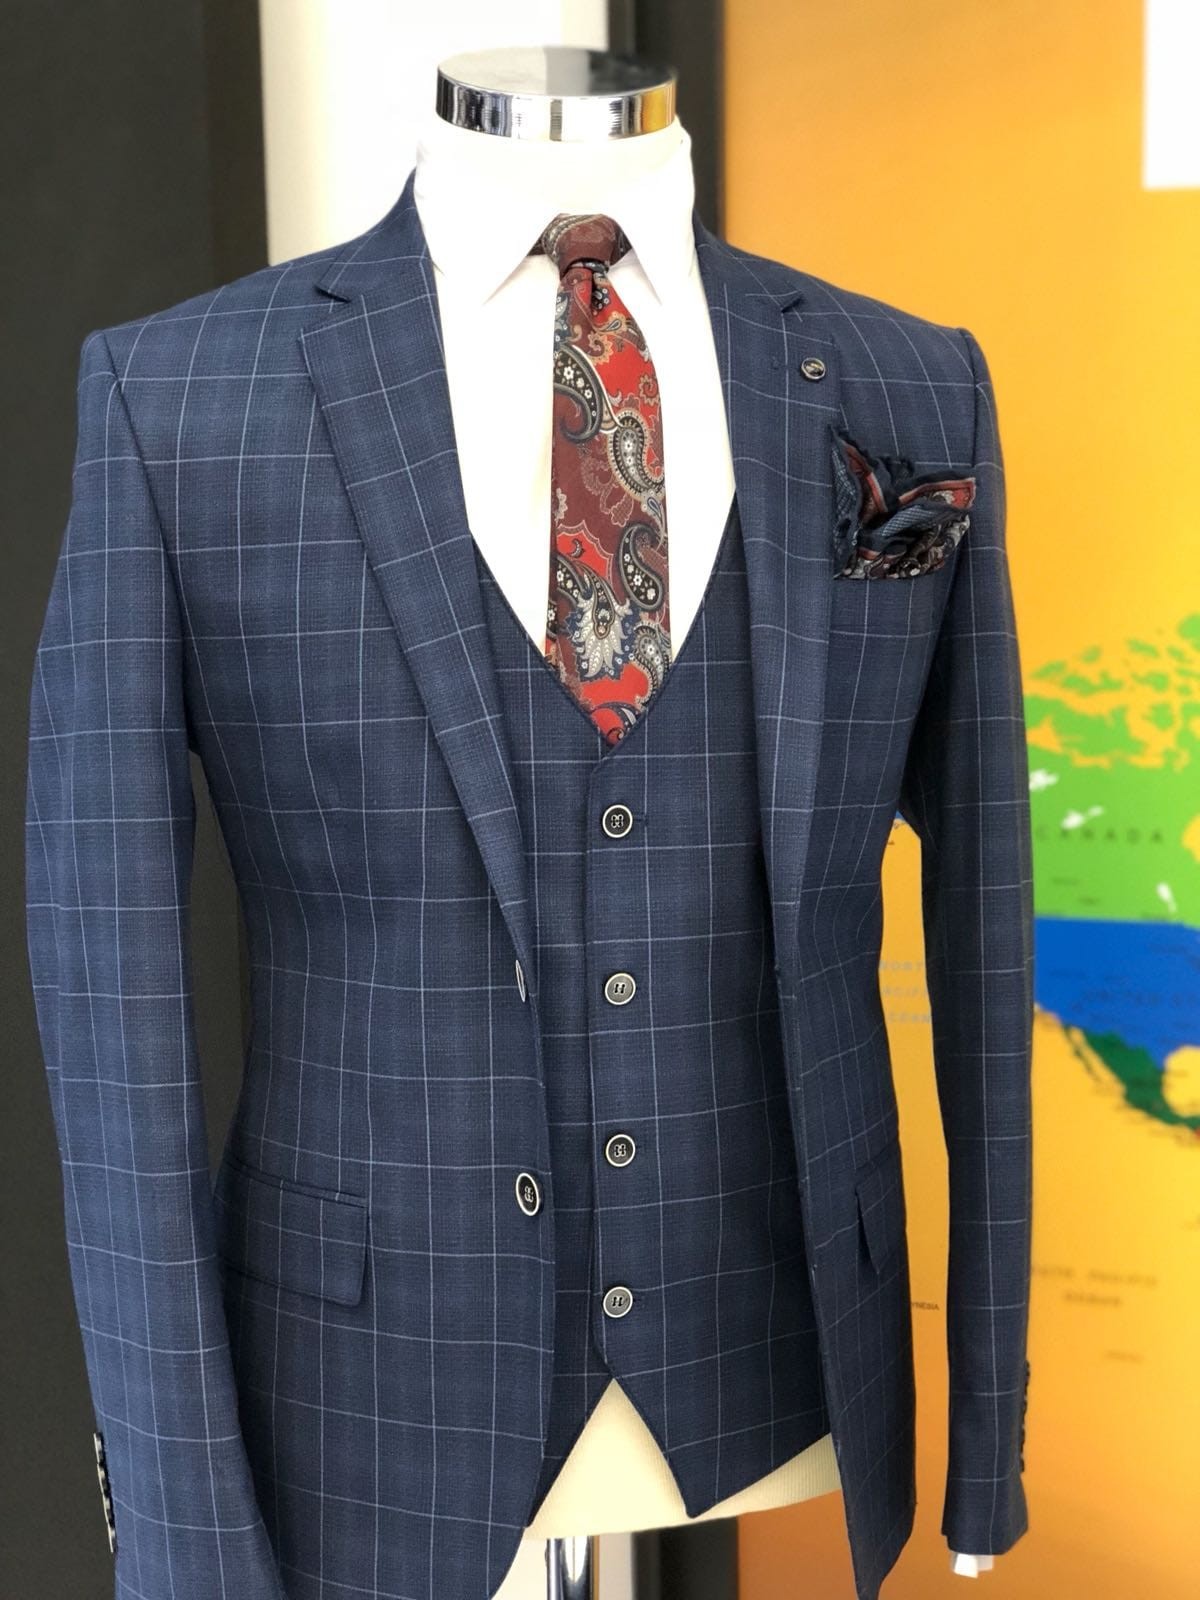 Buy Navy Blue Slim Fit Plaid Suit by Gentwith.com with Free Shipping